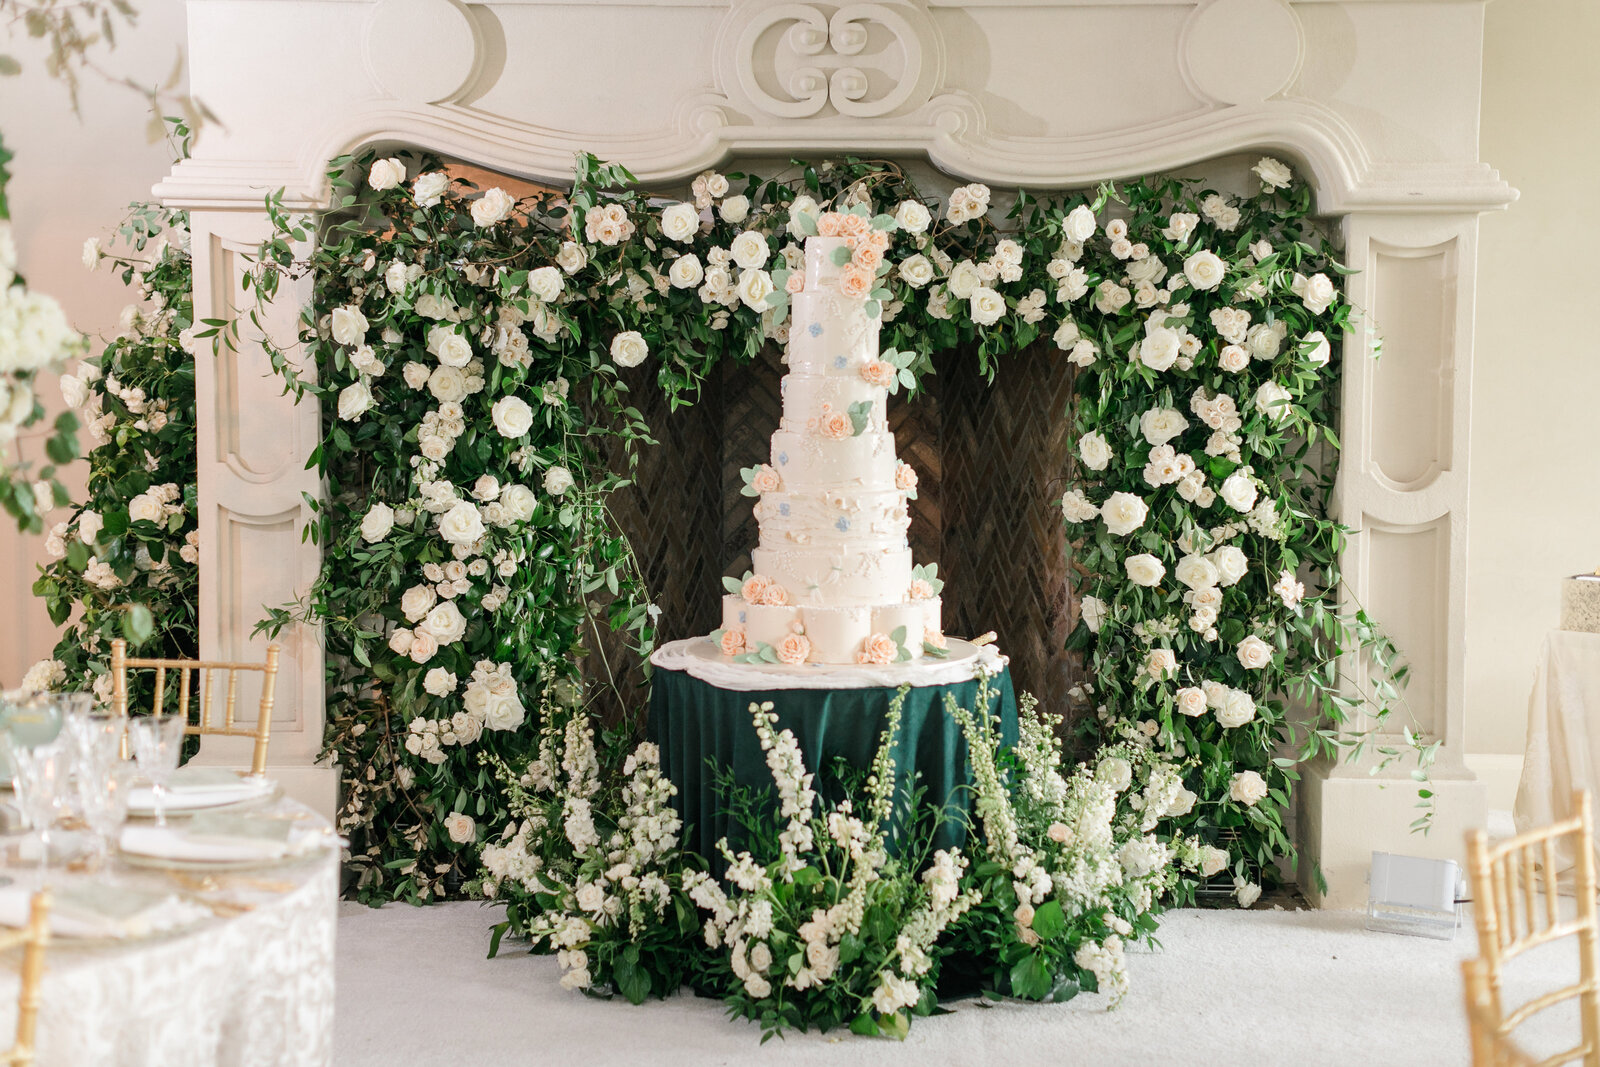 Seven tiered wedding cake made by Carlos Bakery surrounded by an english garden inspired floral wall and arrangements by Sweet Root Village.